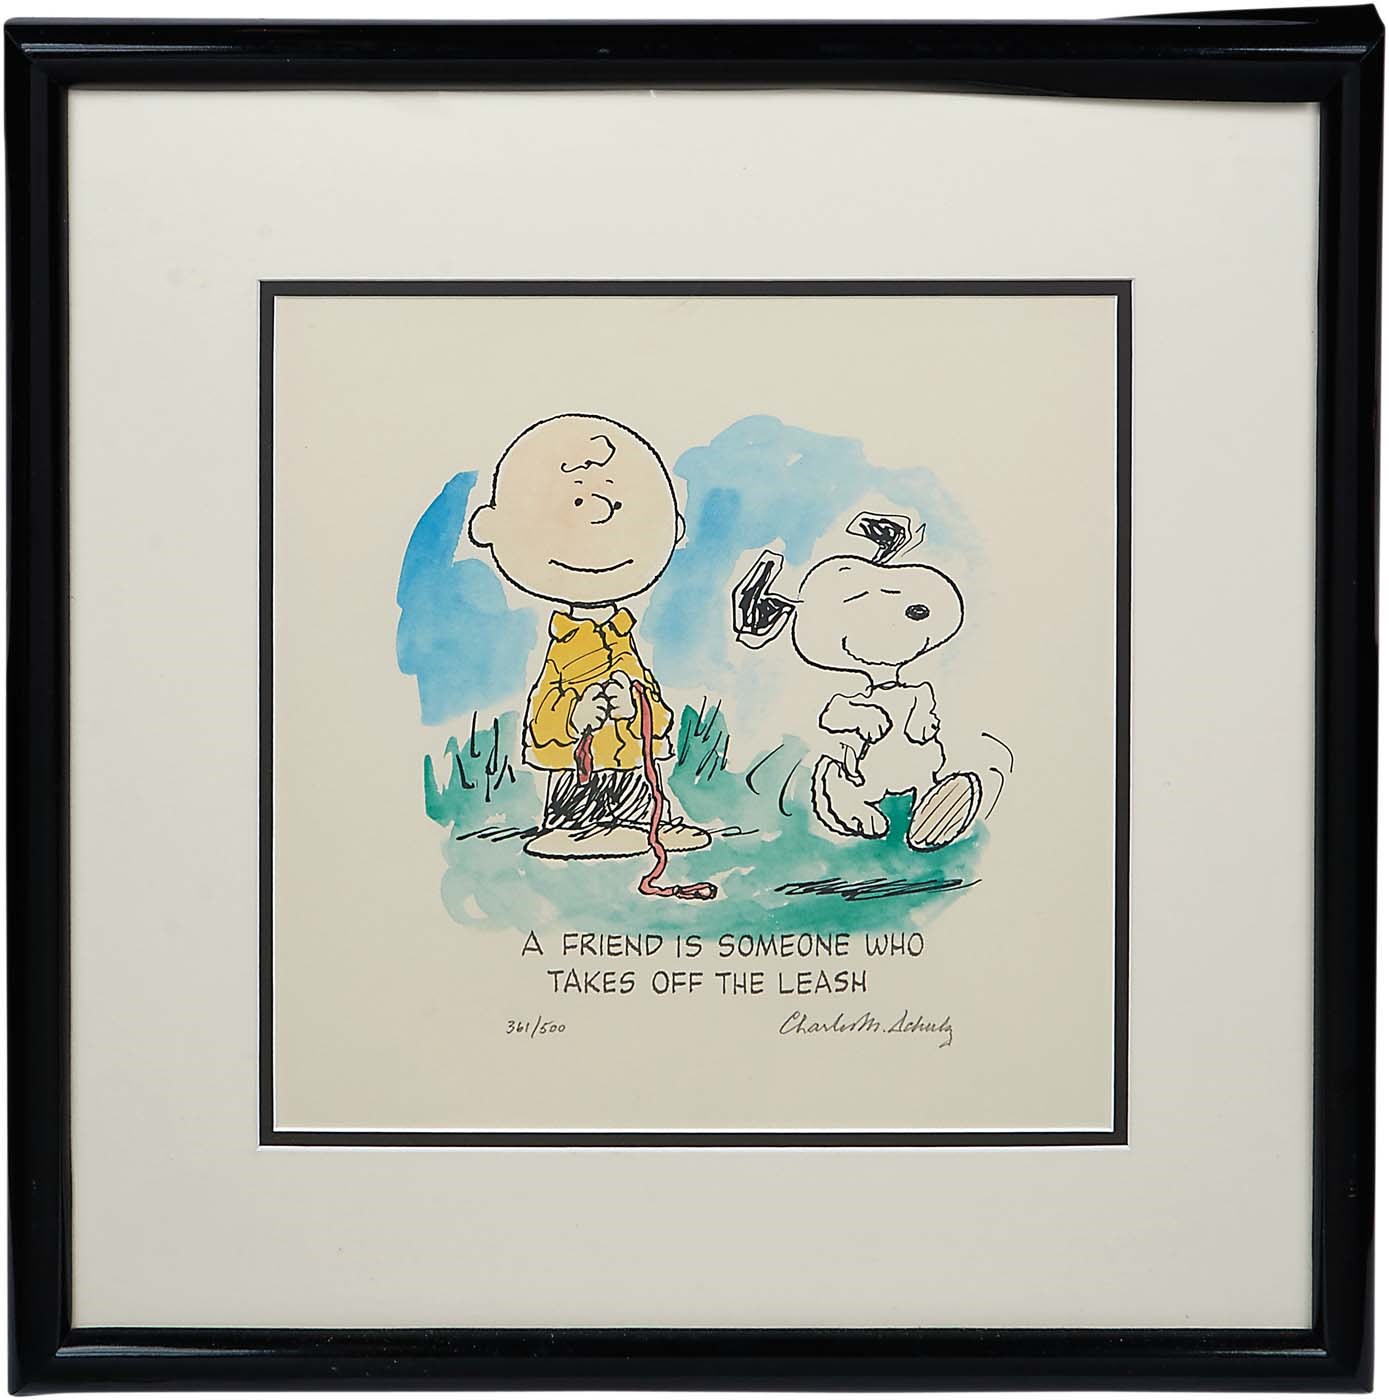 - Charles Schulz Signed Limited Edition Peanuts Lithograph